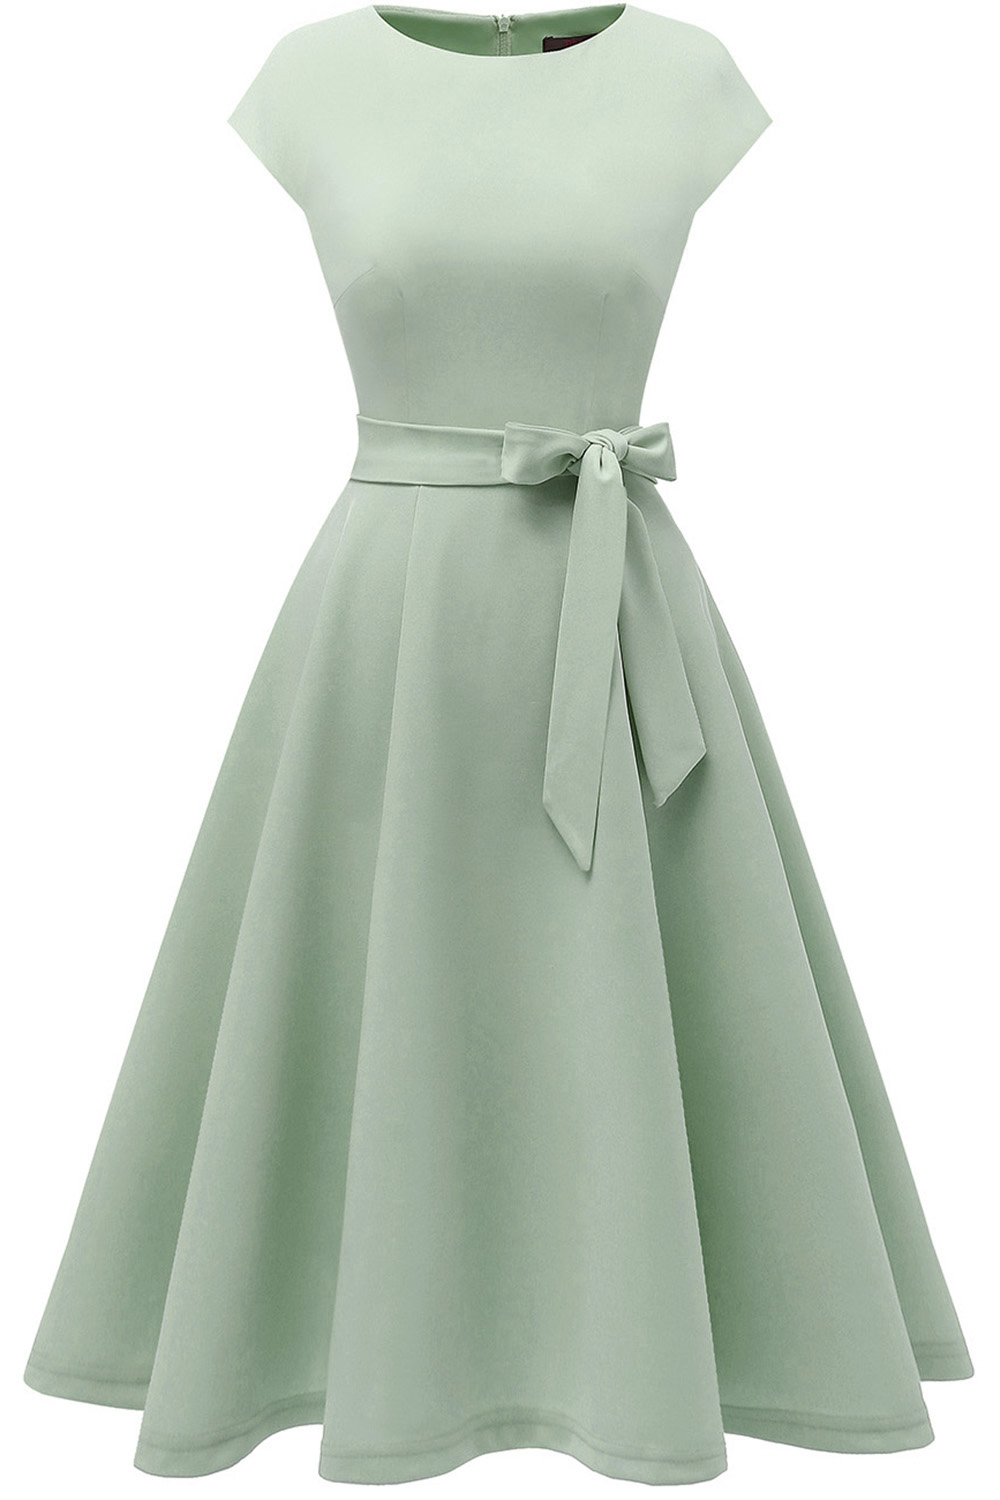 A-Line Knee-Length Lightgreen Cocktail Dress with Cap Sleeves, Vintage Style, Unique and Elegant